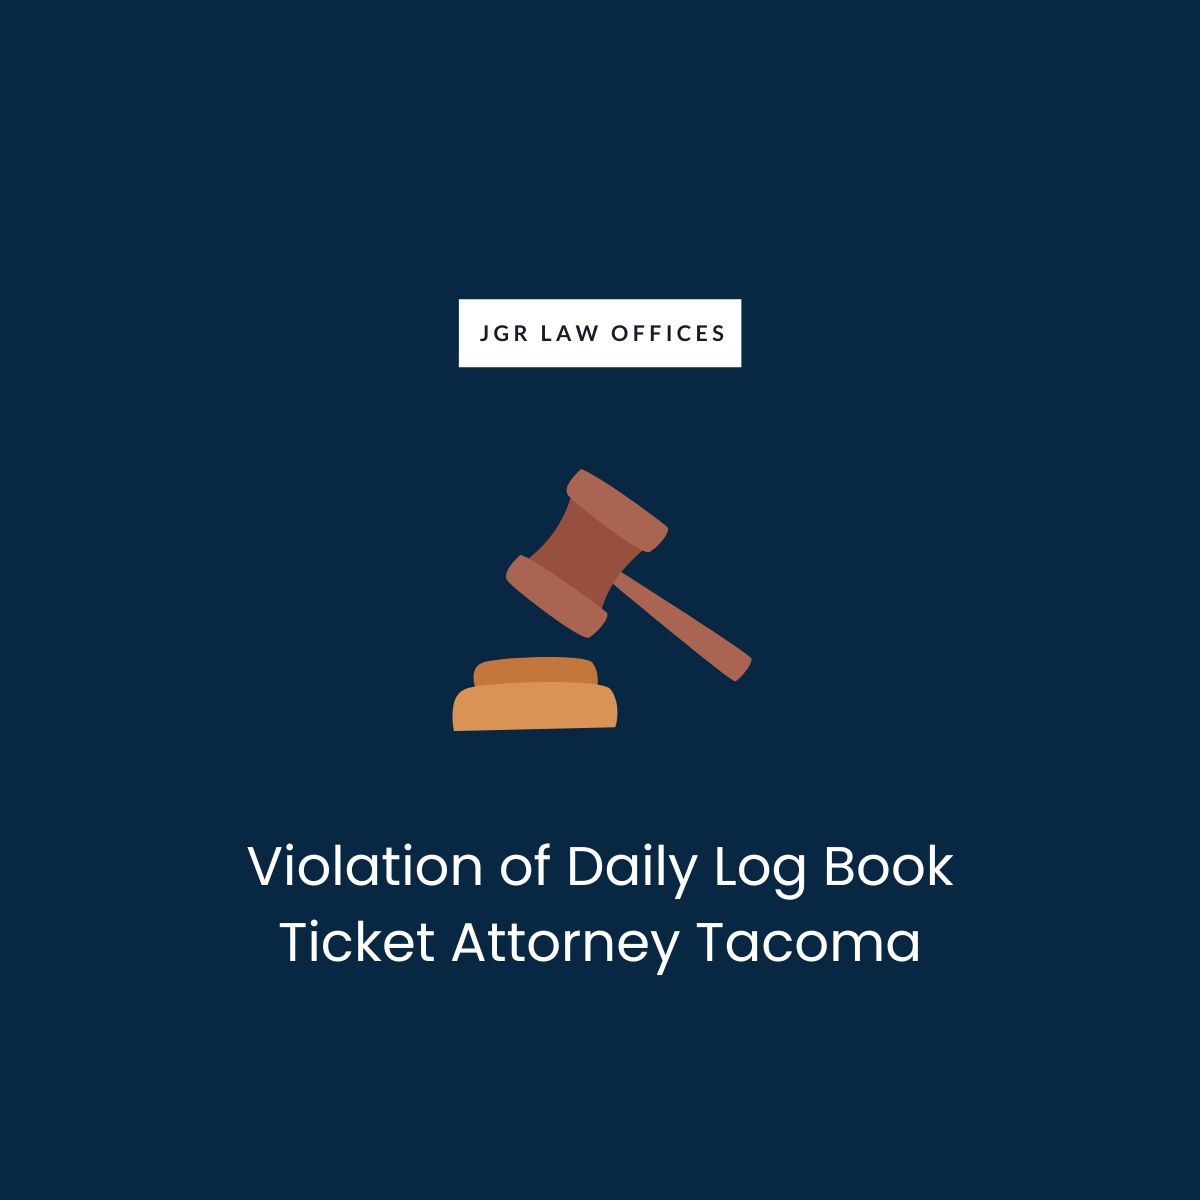 Violation of Daily Log Book Ticket Attorney Tacoma